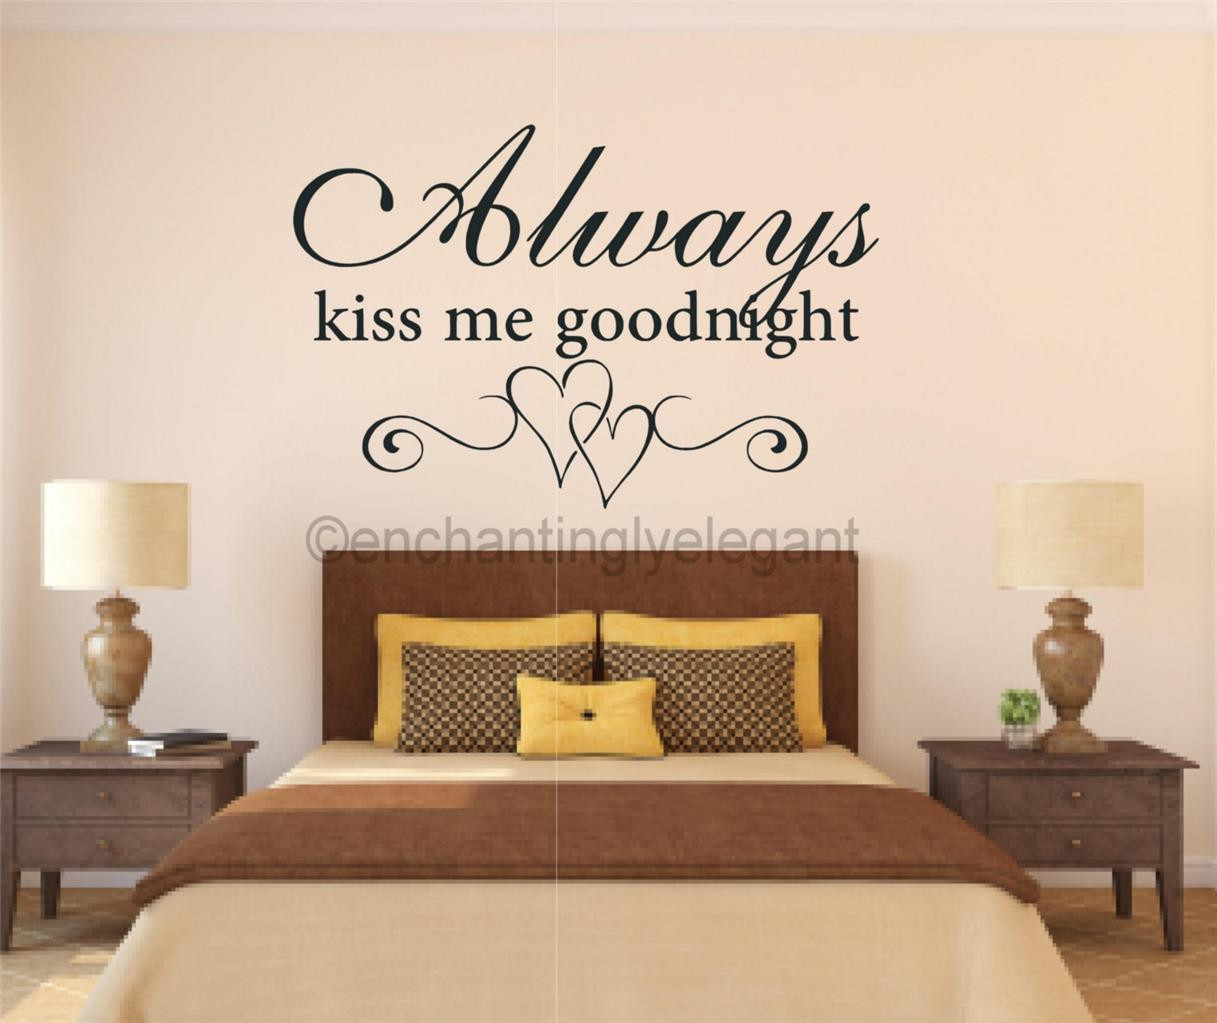 Wall Decal Quotes For Bedroom
 Teen Bedroom Wall Decals Quotes QuotesGram